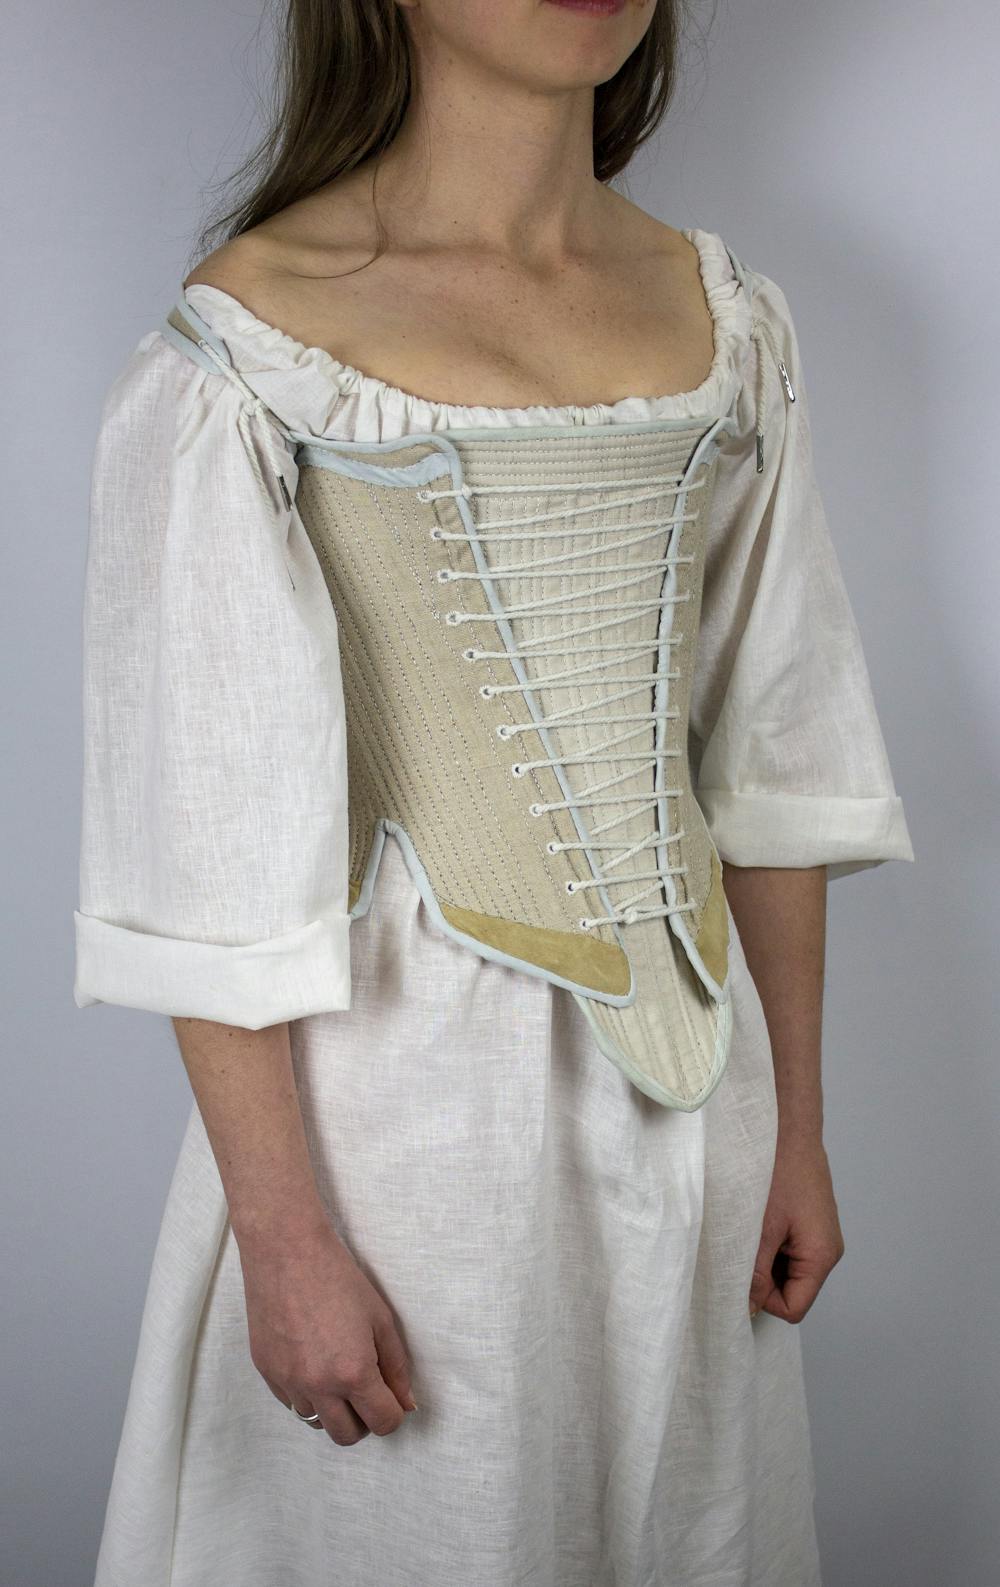 The effect of gender heritage corset in modern society – Global Heritage